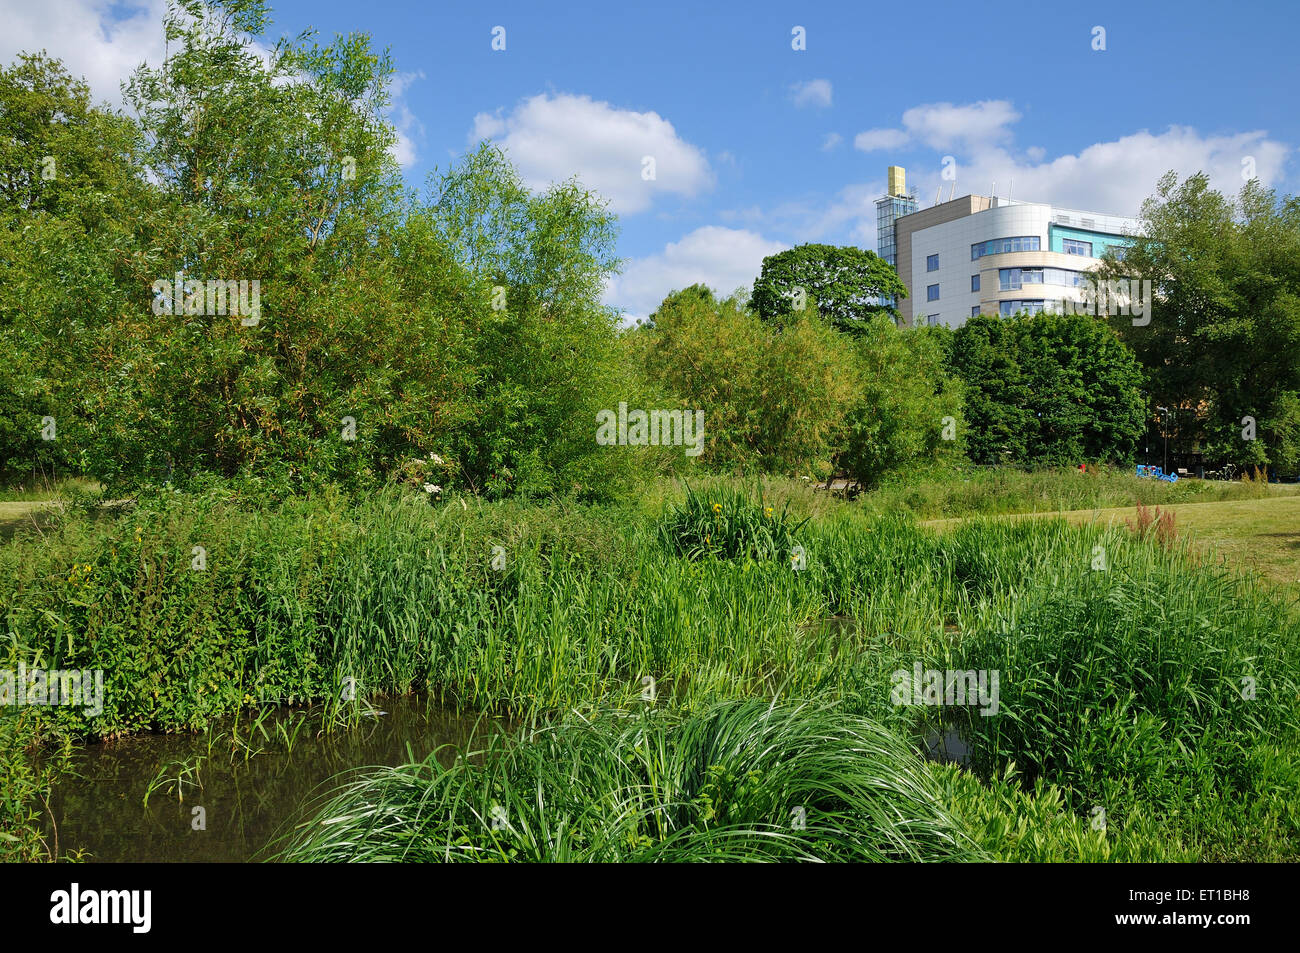 Ladywell Fields green space, South East London UK, with Lewisham University Hospital building Stock Photo